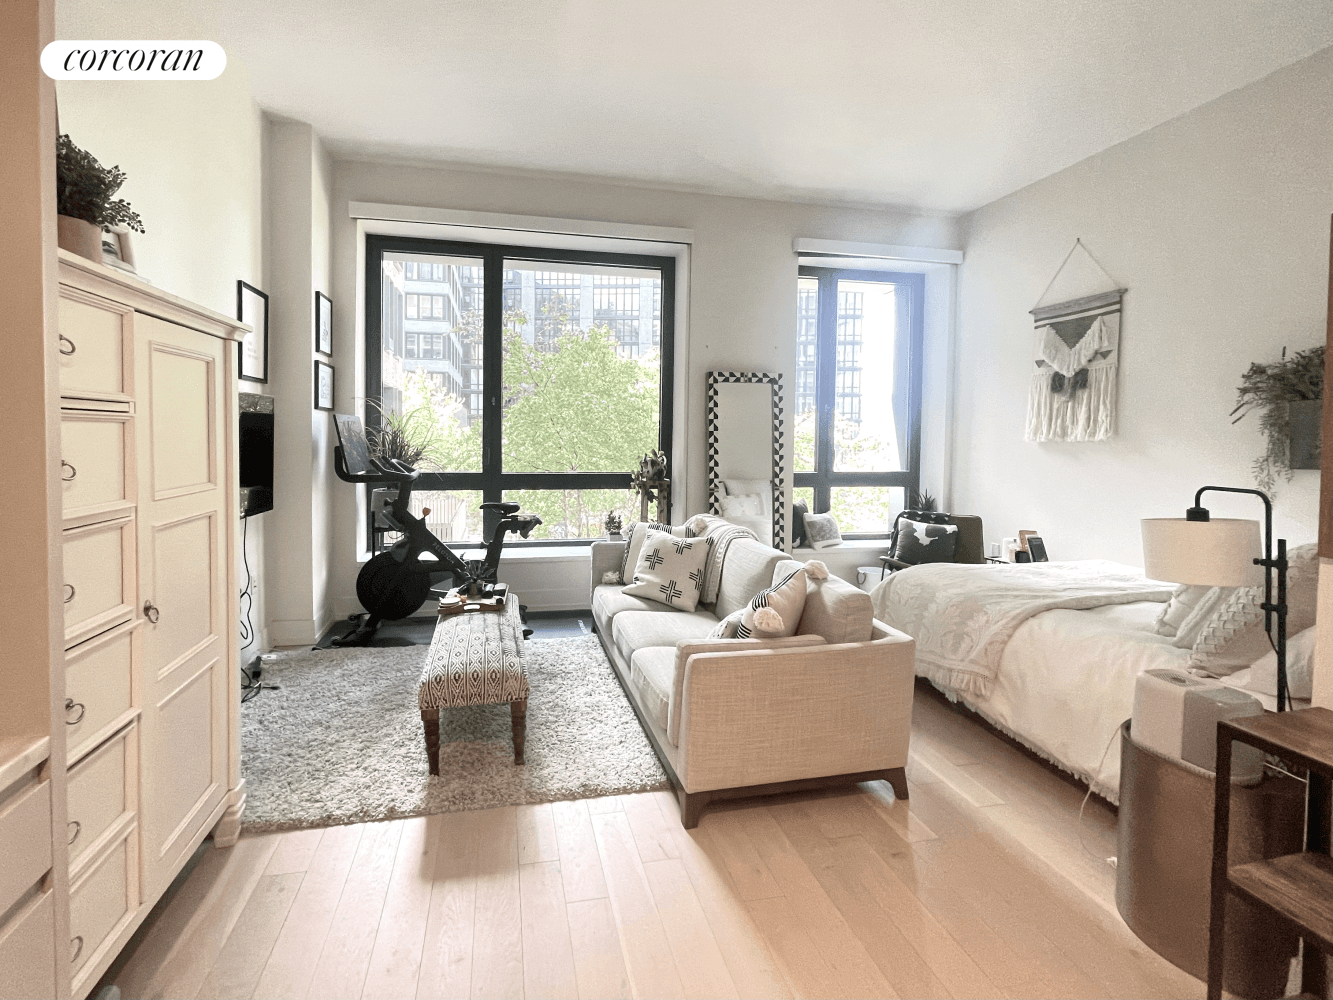 MORE THAN A STUDIO ! ! ! 520sf Large Studio with Alcove in 550 Vanderbilt, a full service luxury condo building in the heart of Prospect Heights, Brooklyn.